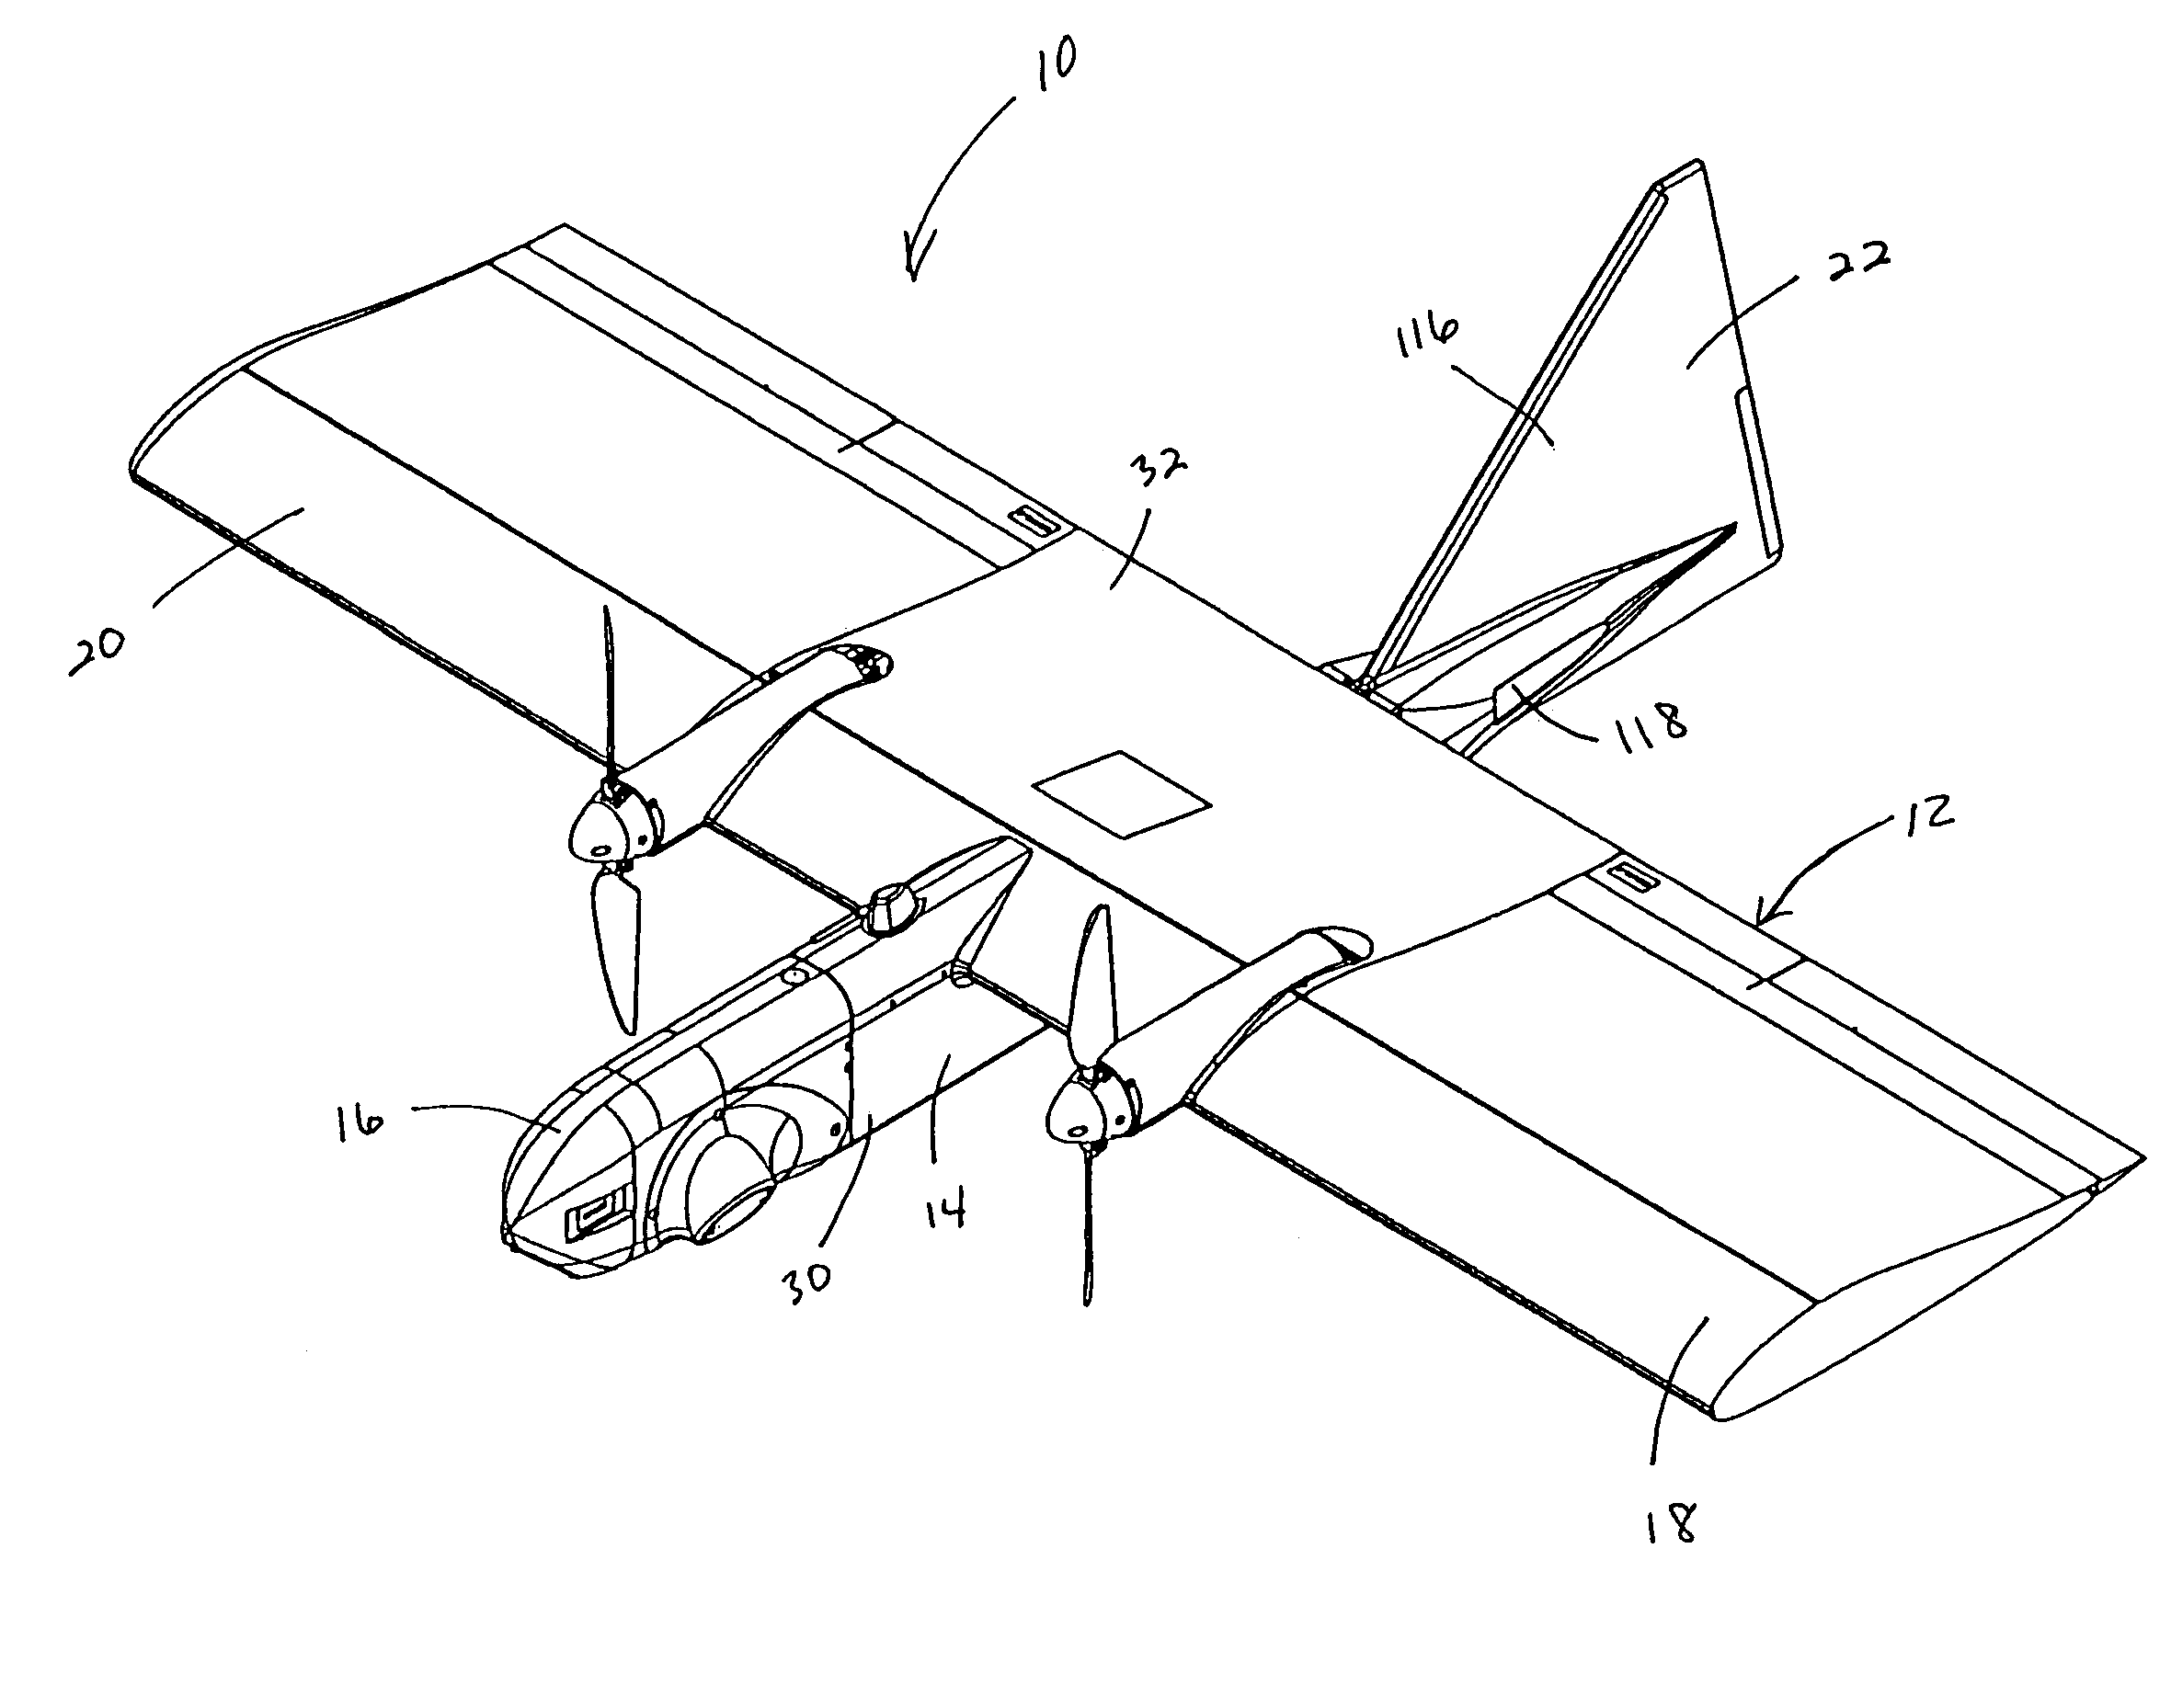 Autonomous, back-packable computer-controlled breakaway unmanned aerial vehicle (UAV)